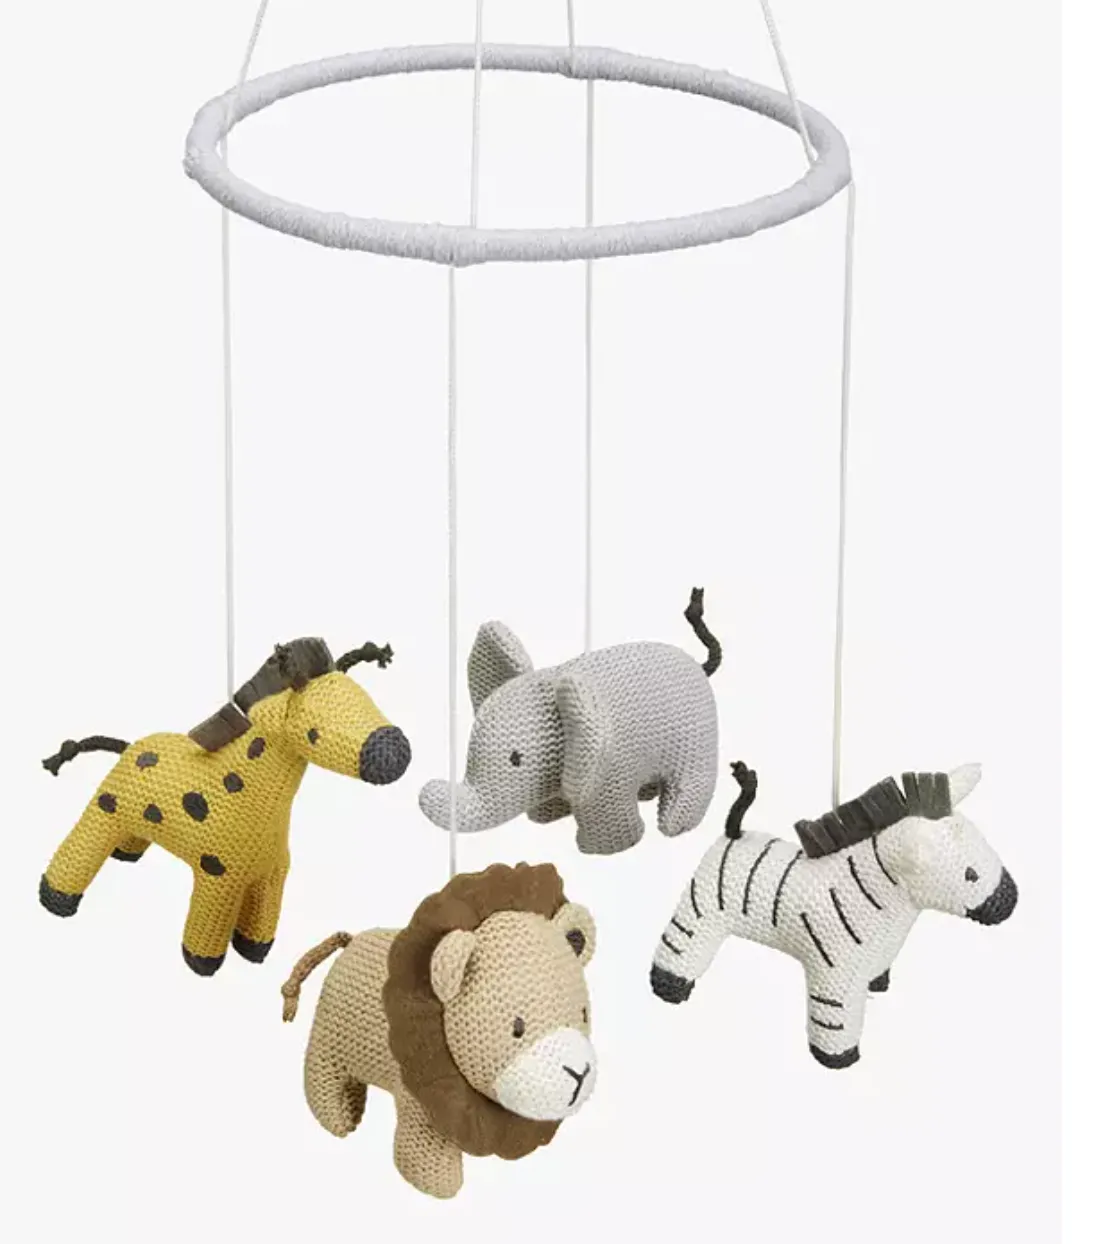 safari toys for 3 year olds